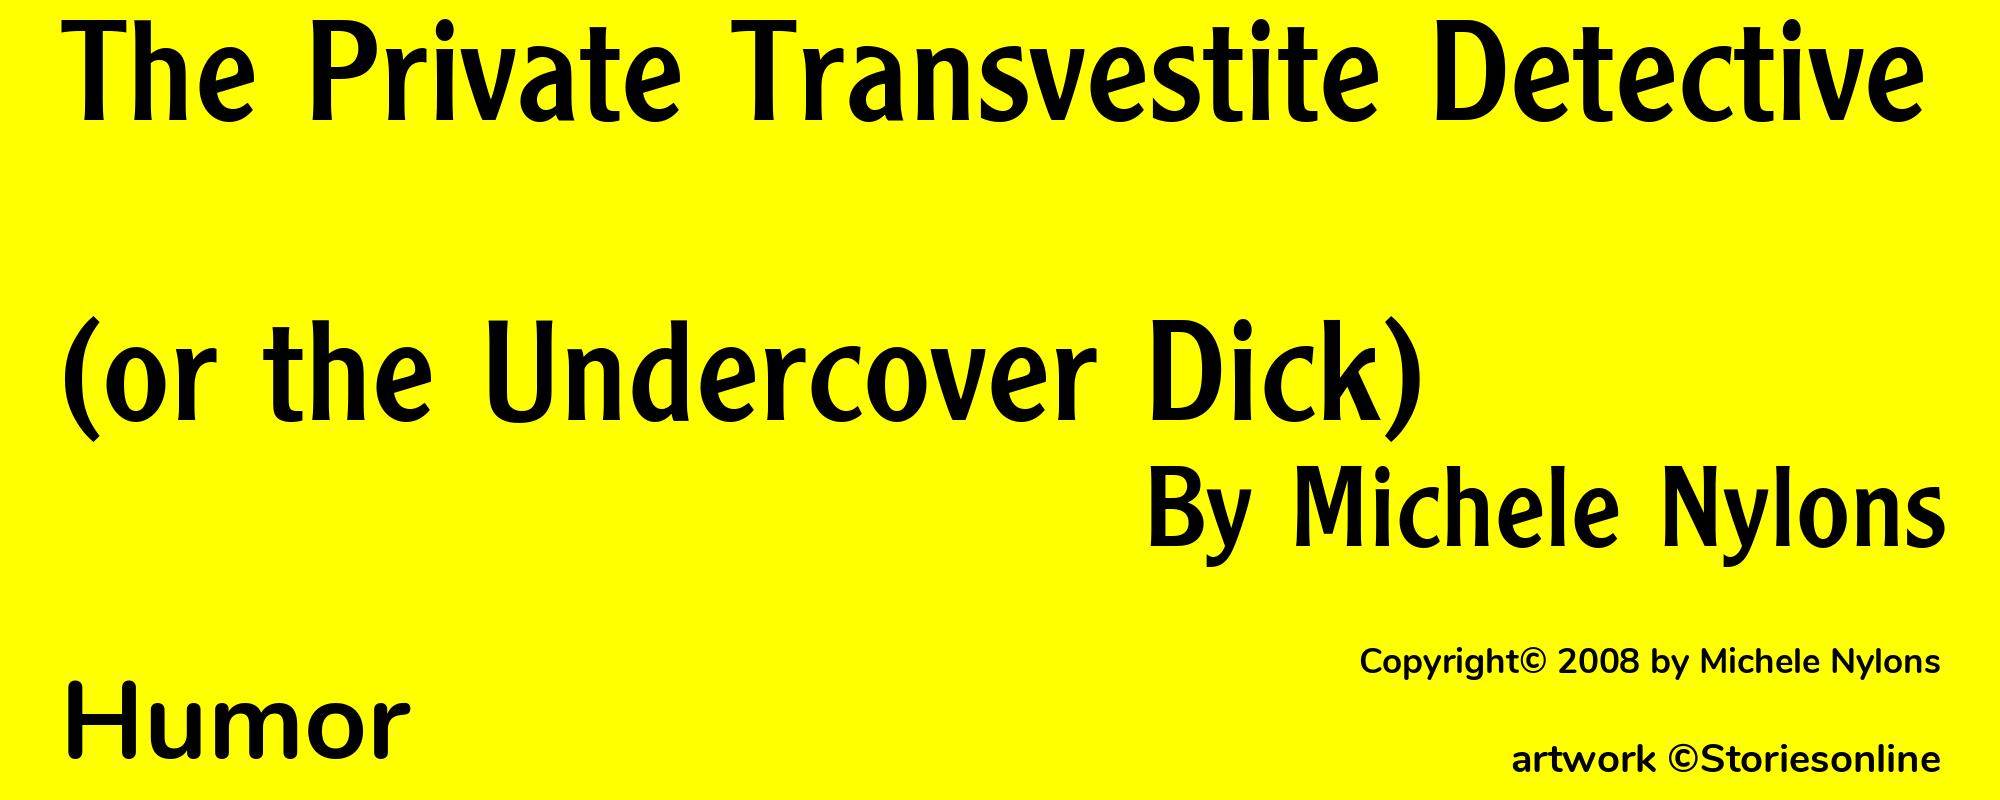 The Private Transvestite Detective (or the Undercover Dick) - Cover